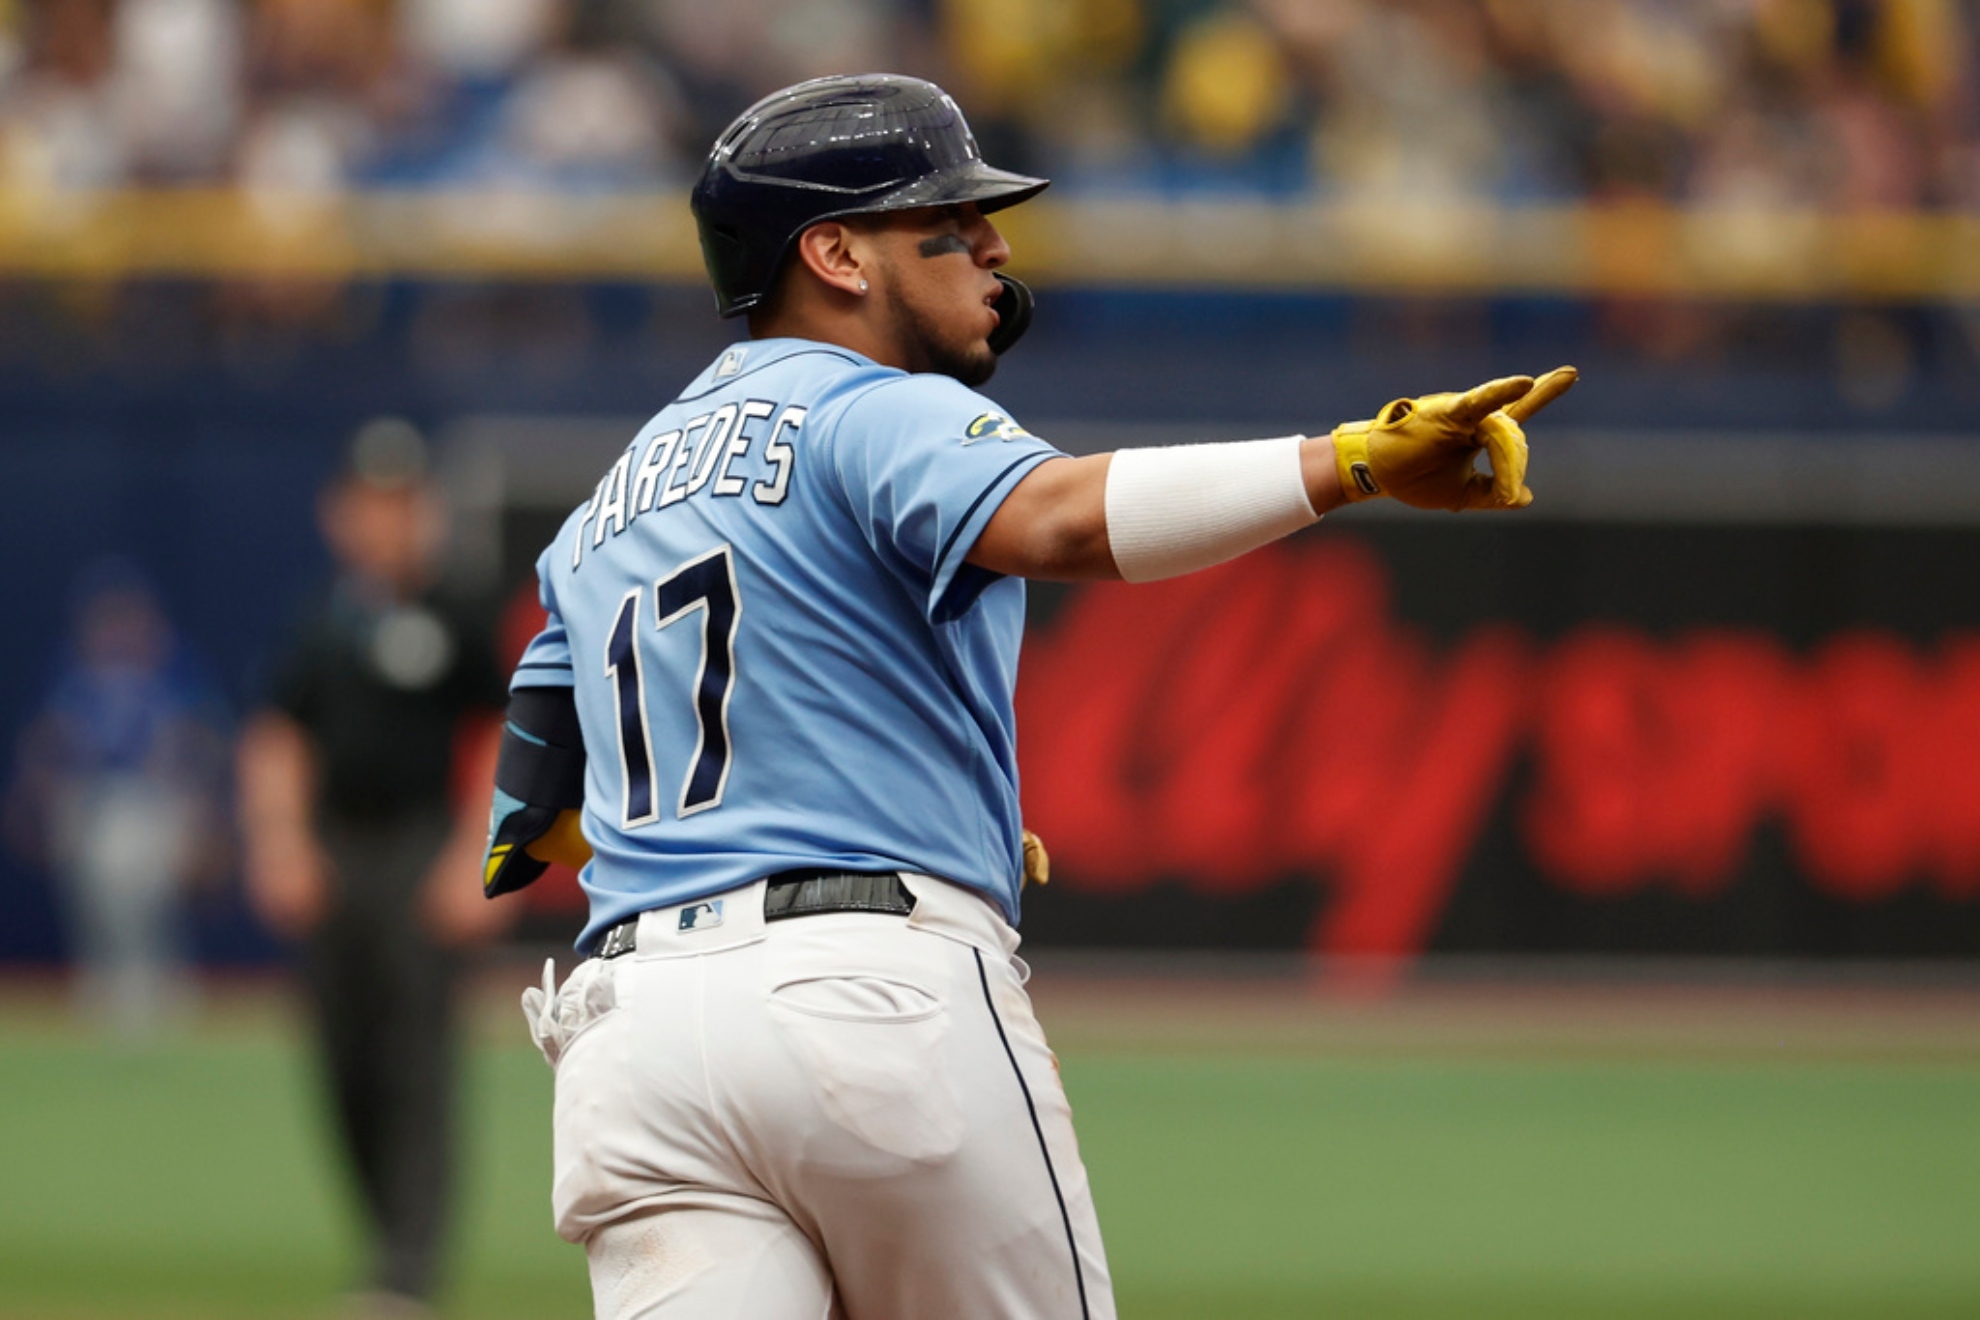 Rays Isaac Paredes breaks home run record hitting his 30th of the season amid Arozarena injury